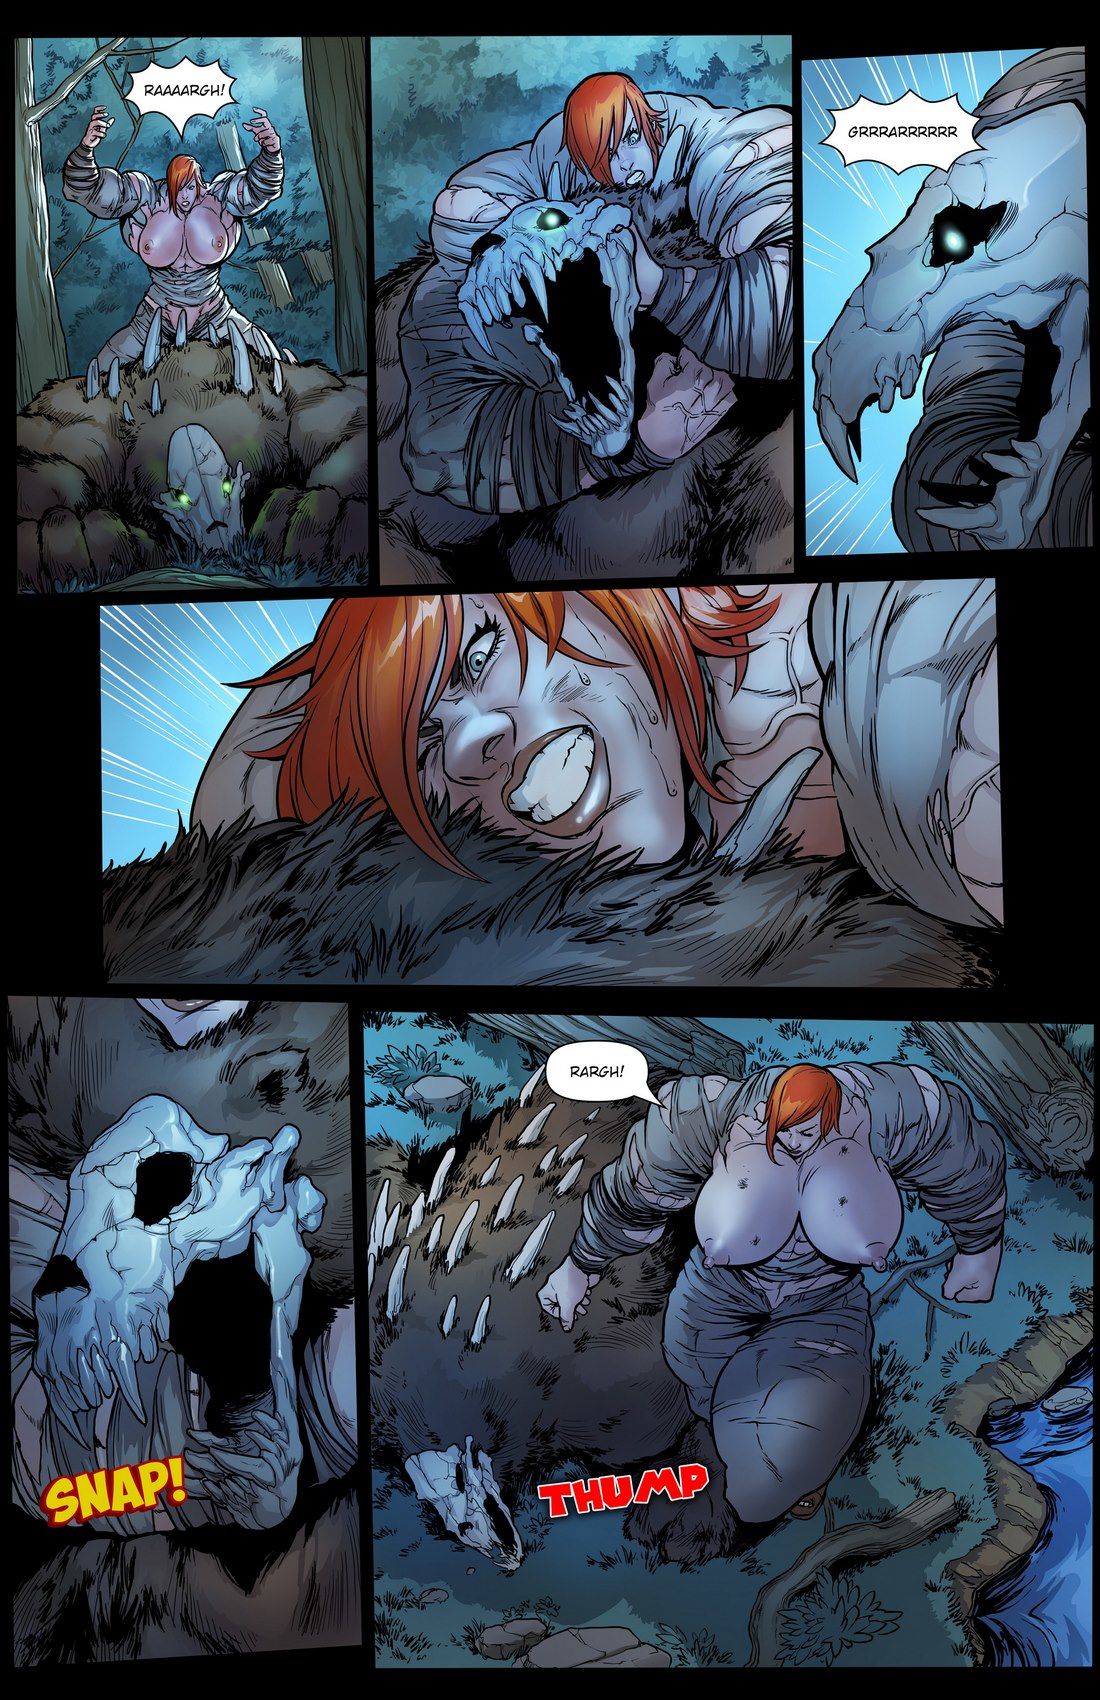 The Strong Shall Survive Issue 02 MuscleFan page 10